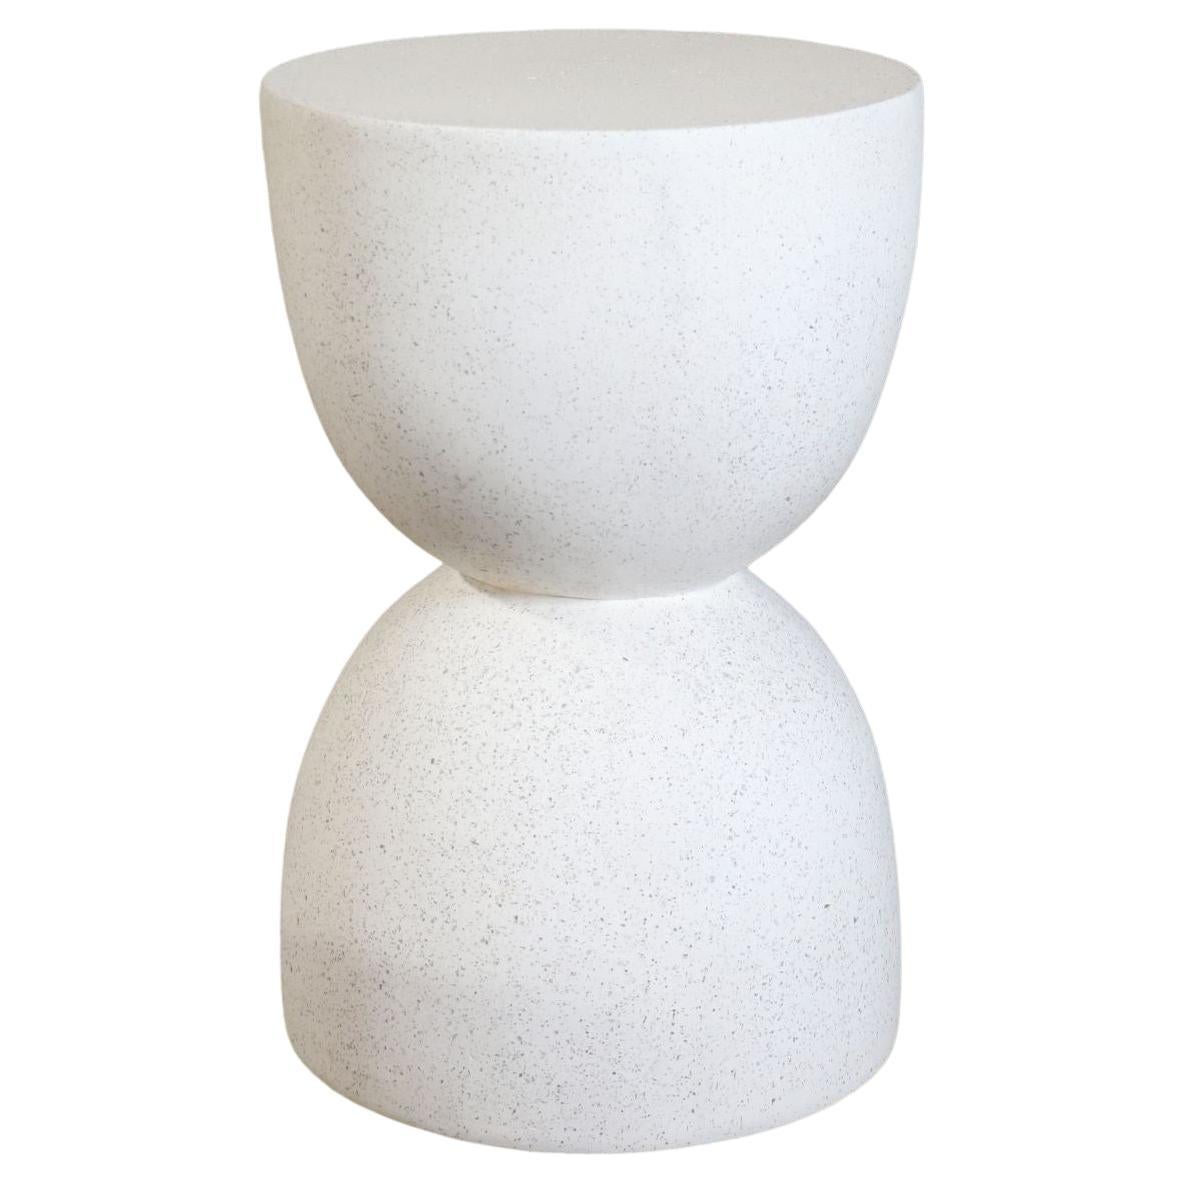 Cast Resin 'Bilbouquet' Side Table, White Stone Finish by Zachary A. Design For Sale